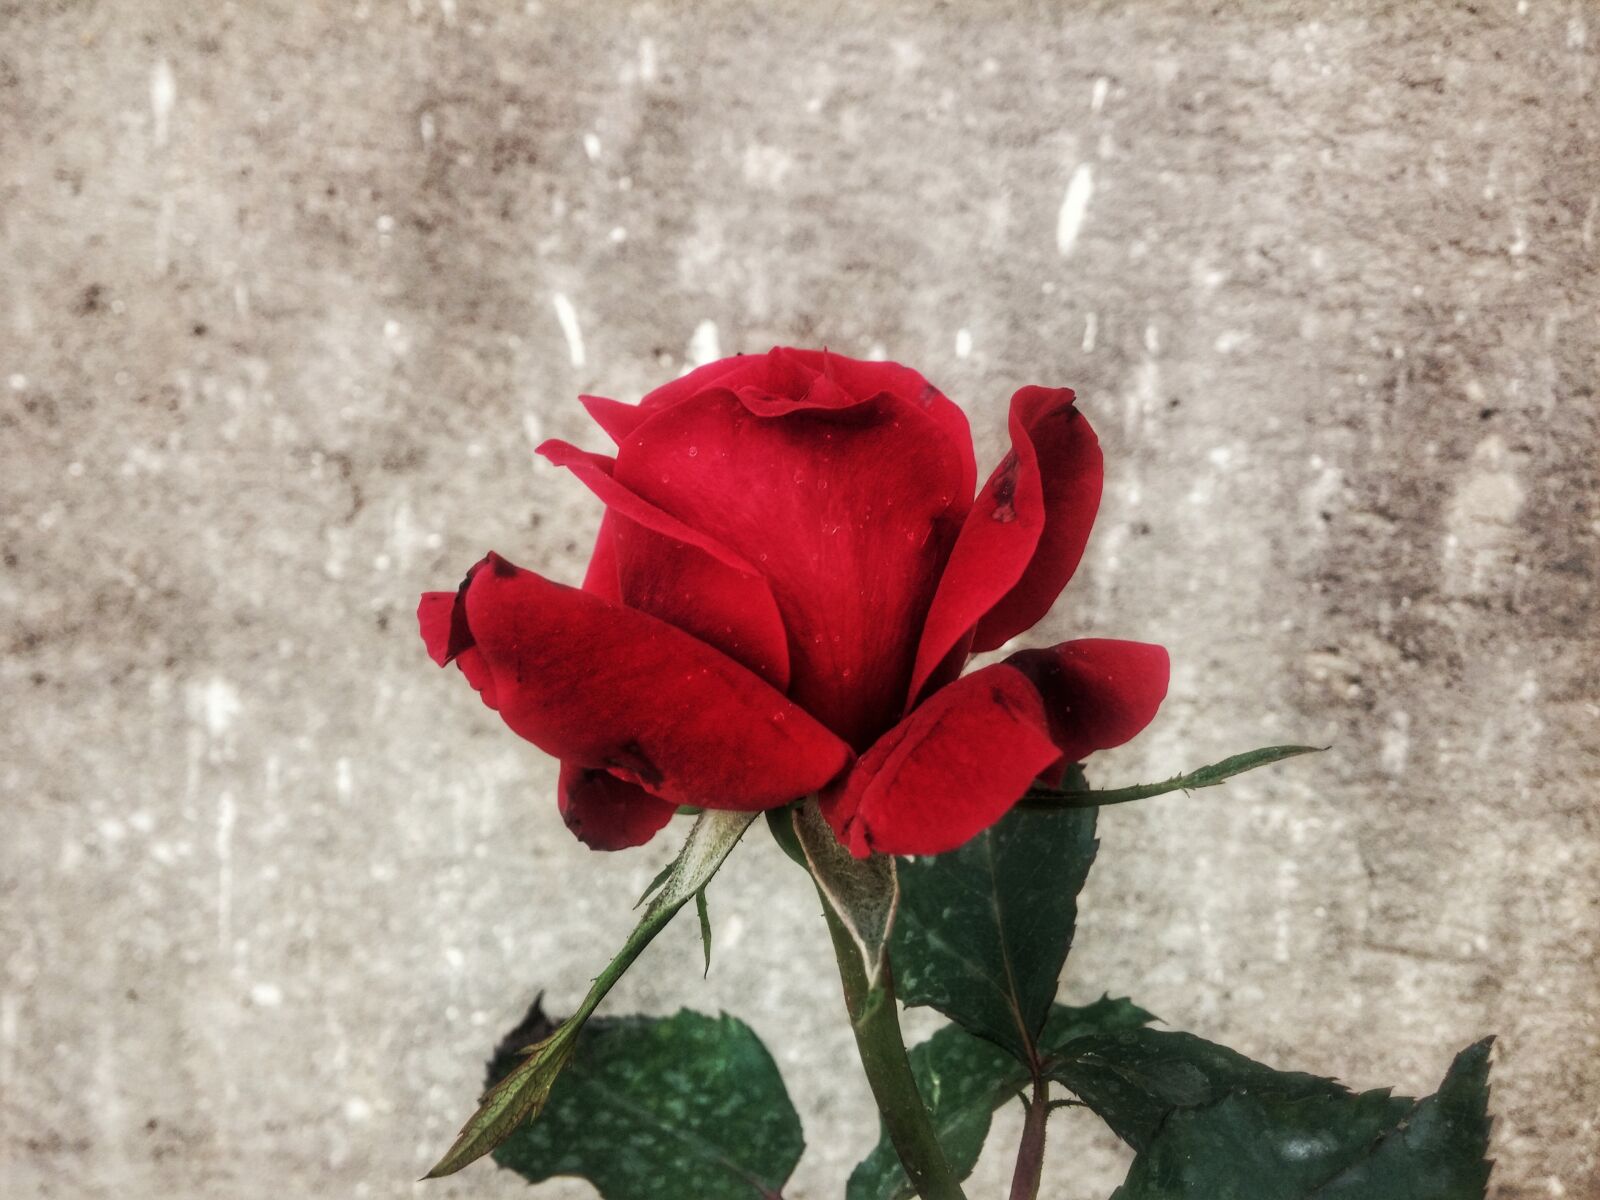 LG G2 sample photo. Beautiful, flowers, red, rose photography